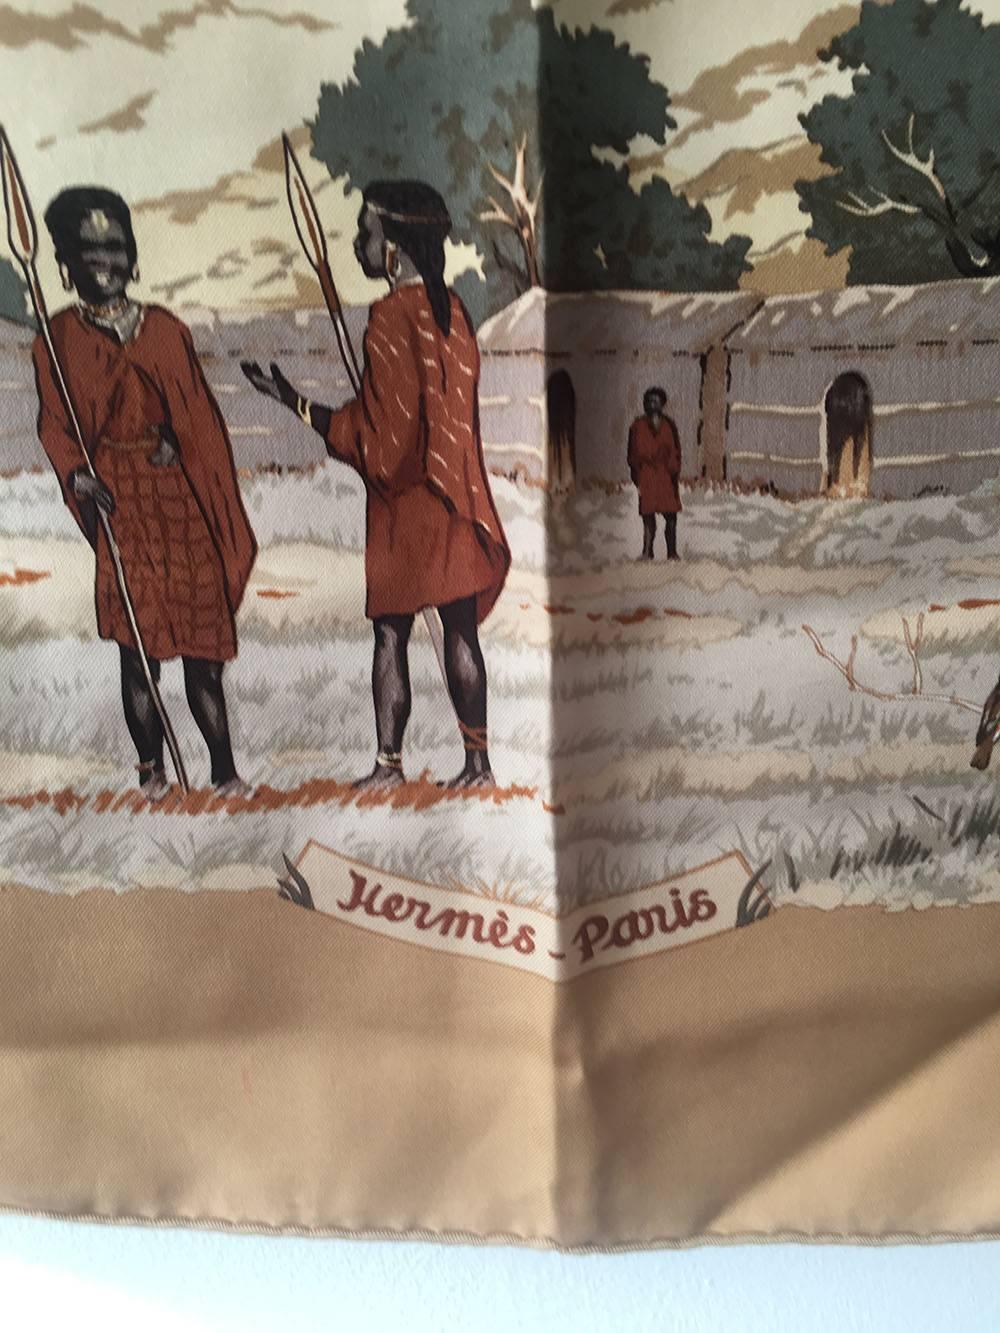 RARE Hermes Vintage Tanzanie Silk Scarf c1970s in excellent condition.  Original silk screen design c1977 by Robert Dallet features assorted scenes of the Tanzanian bush.  Giraffe's, zebras, lions, leopards, cranes, tribesman, and flamingos are